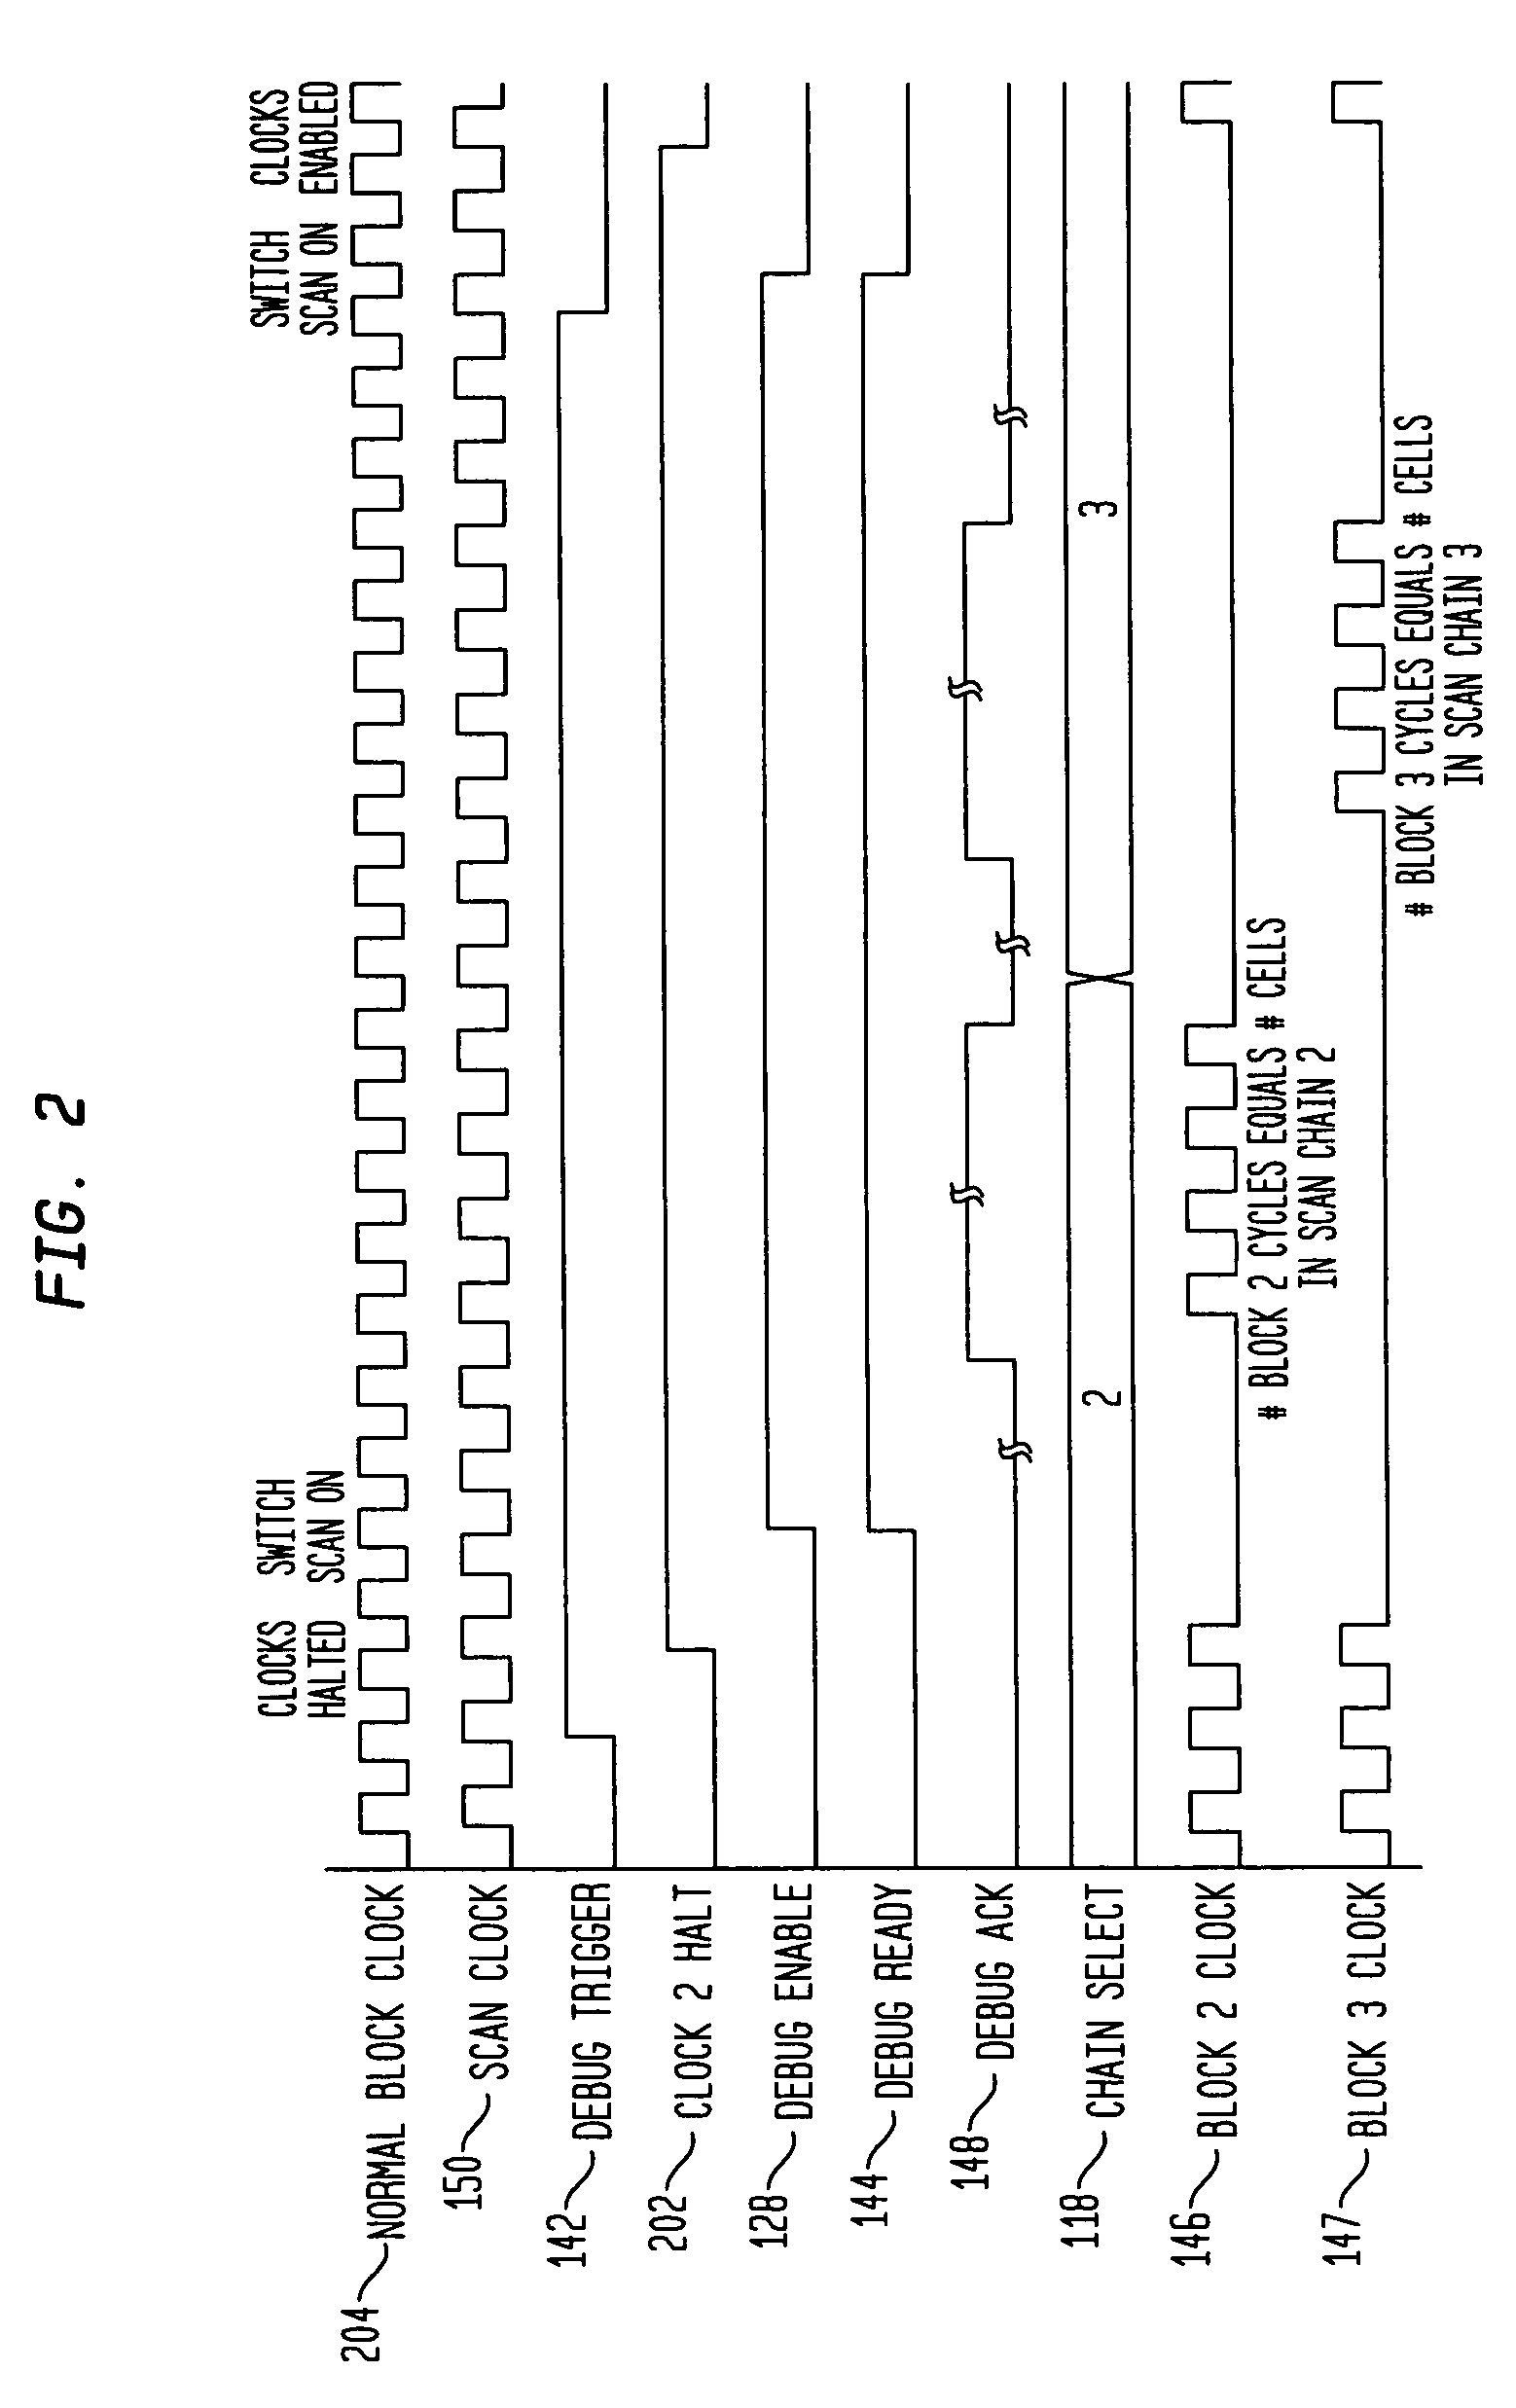 System and method for debugging system-on-chips